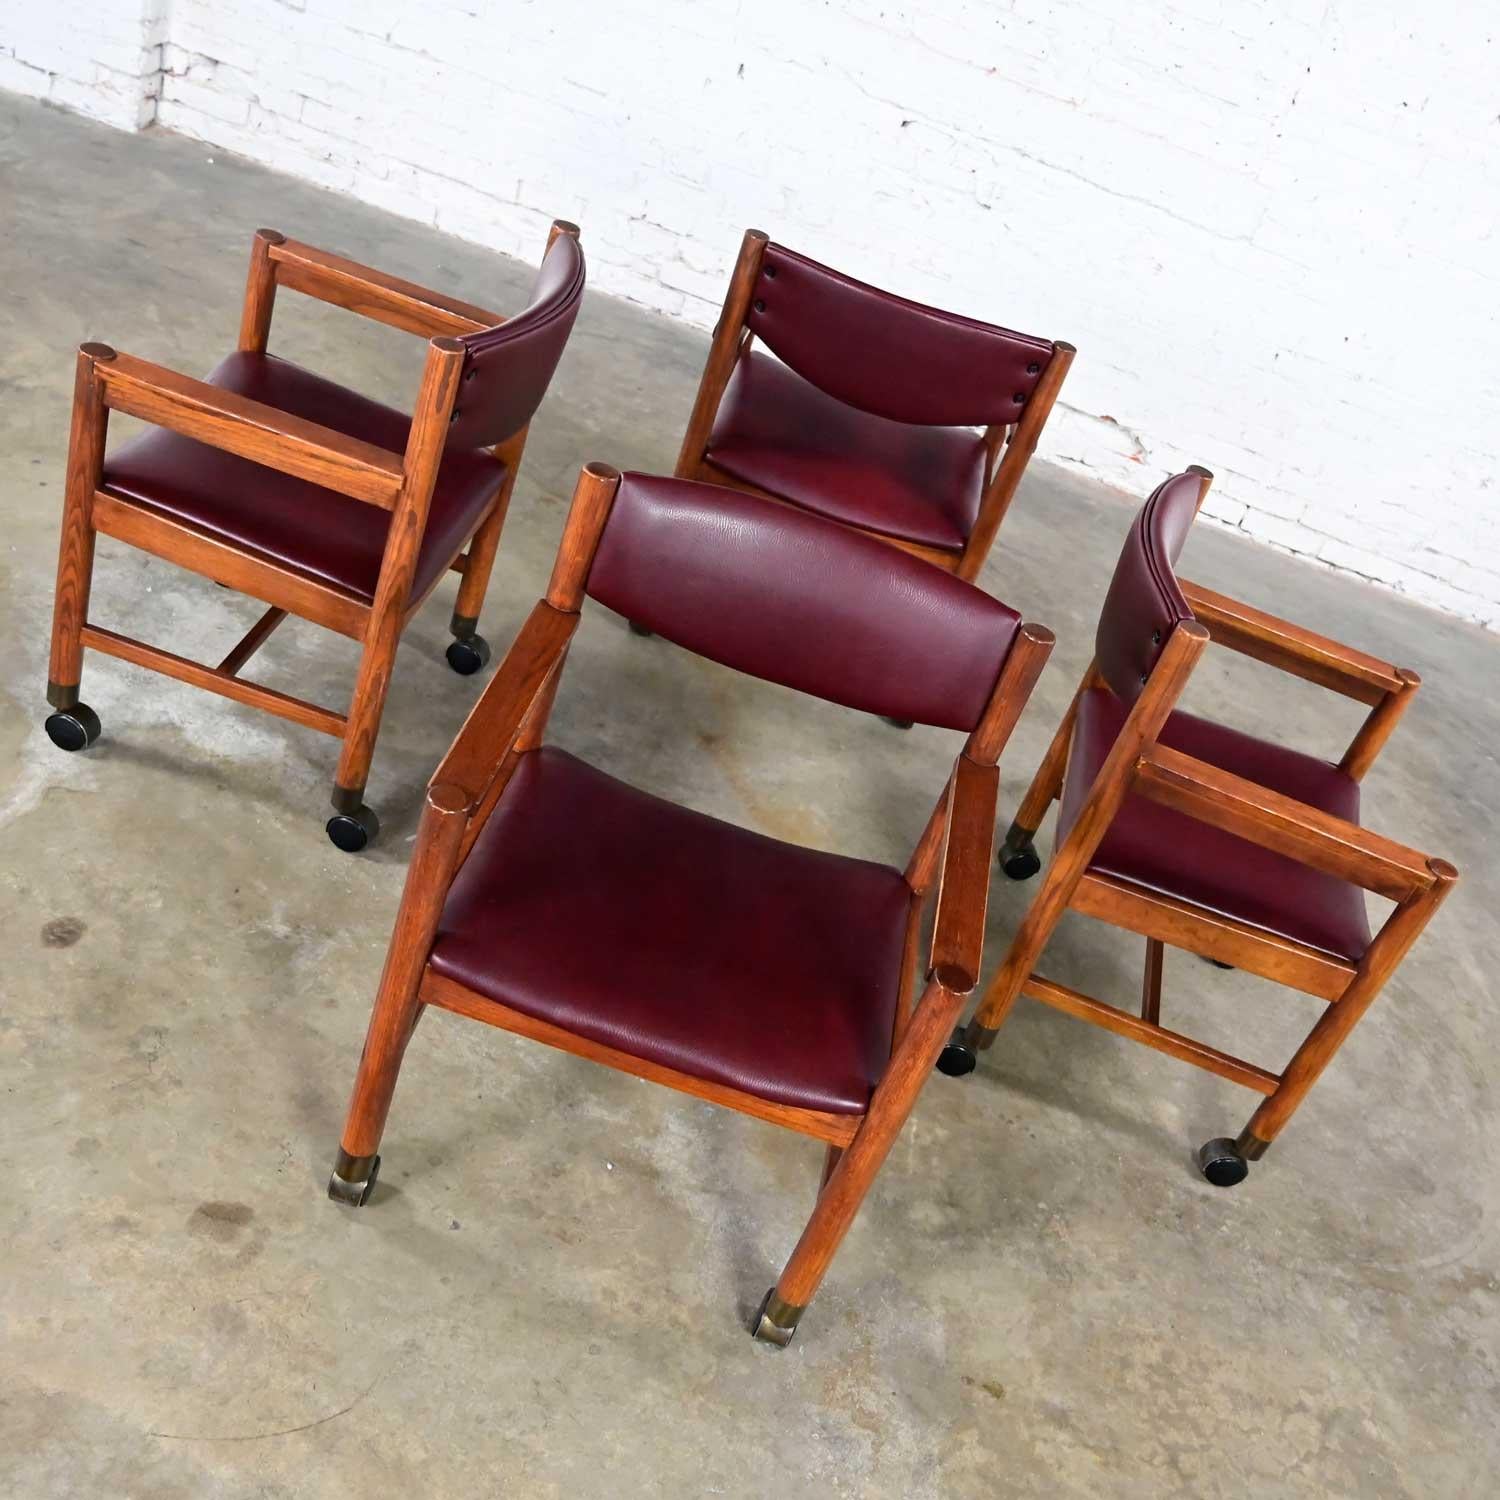 Wonderful Mid-Century Modern to modern rolling game or dining chairs comprised of oak frames, maroon vinyl seats and backs, brass sabots, and casters. Beautiful condition, keeping in mind that this is vintage and not new so will have signs of use